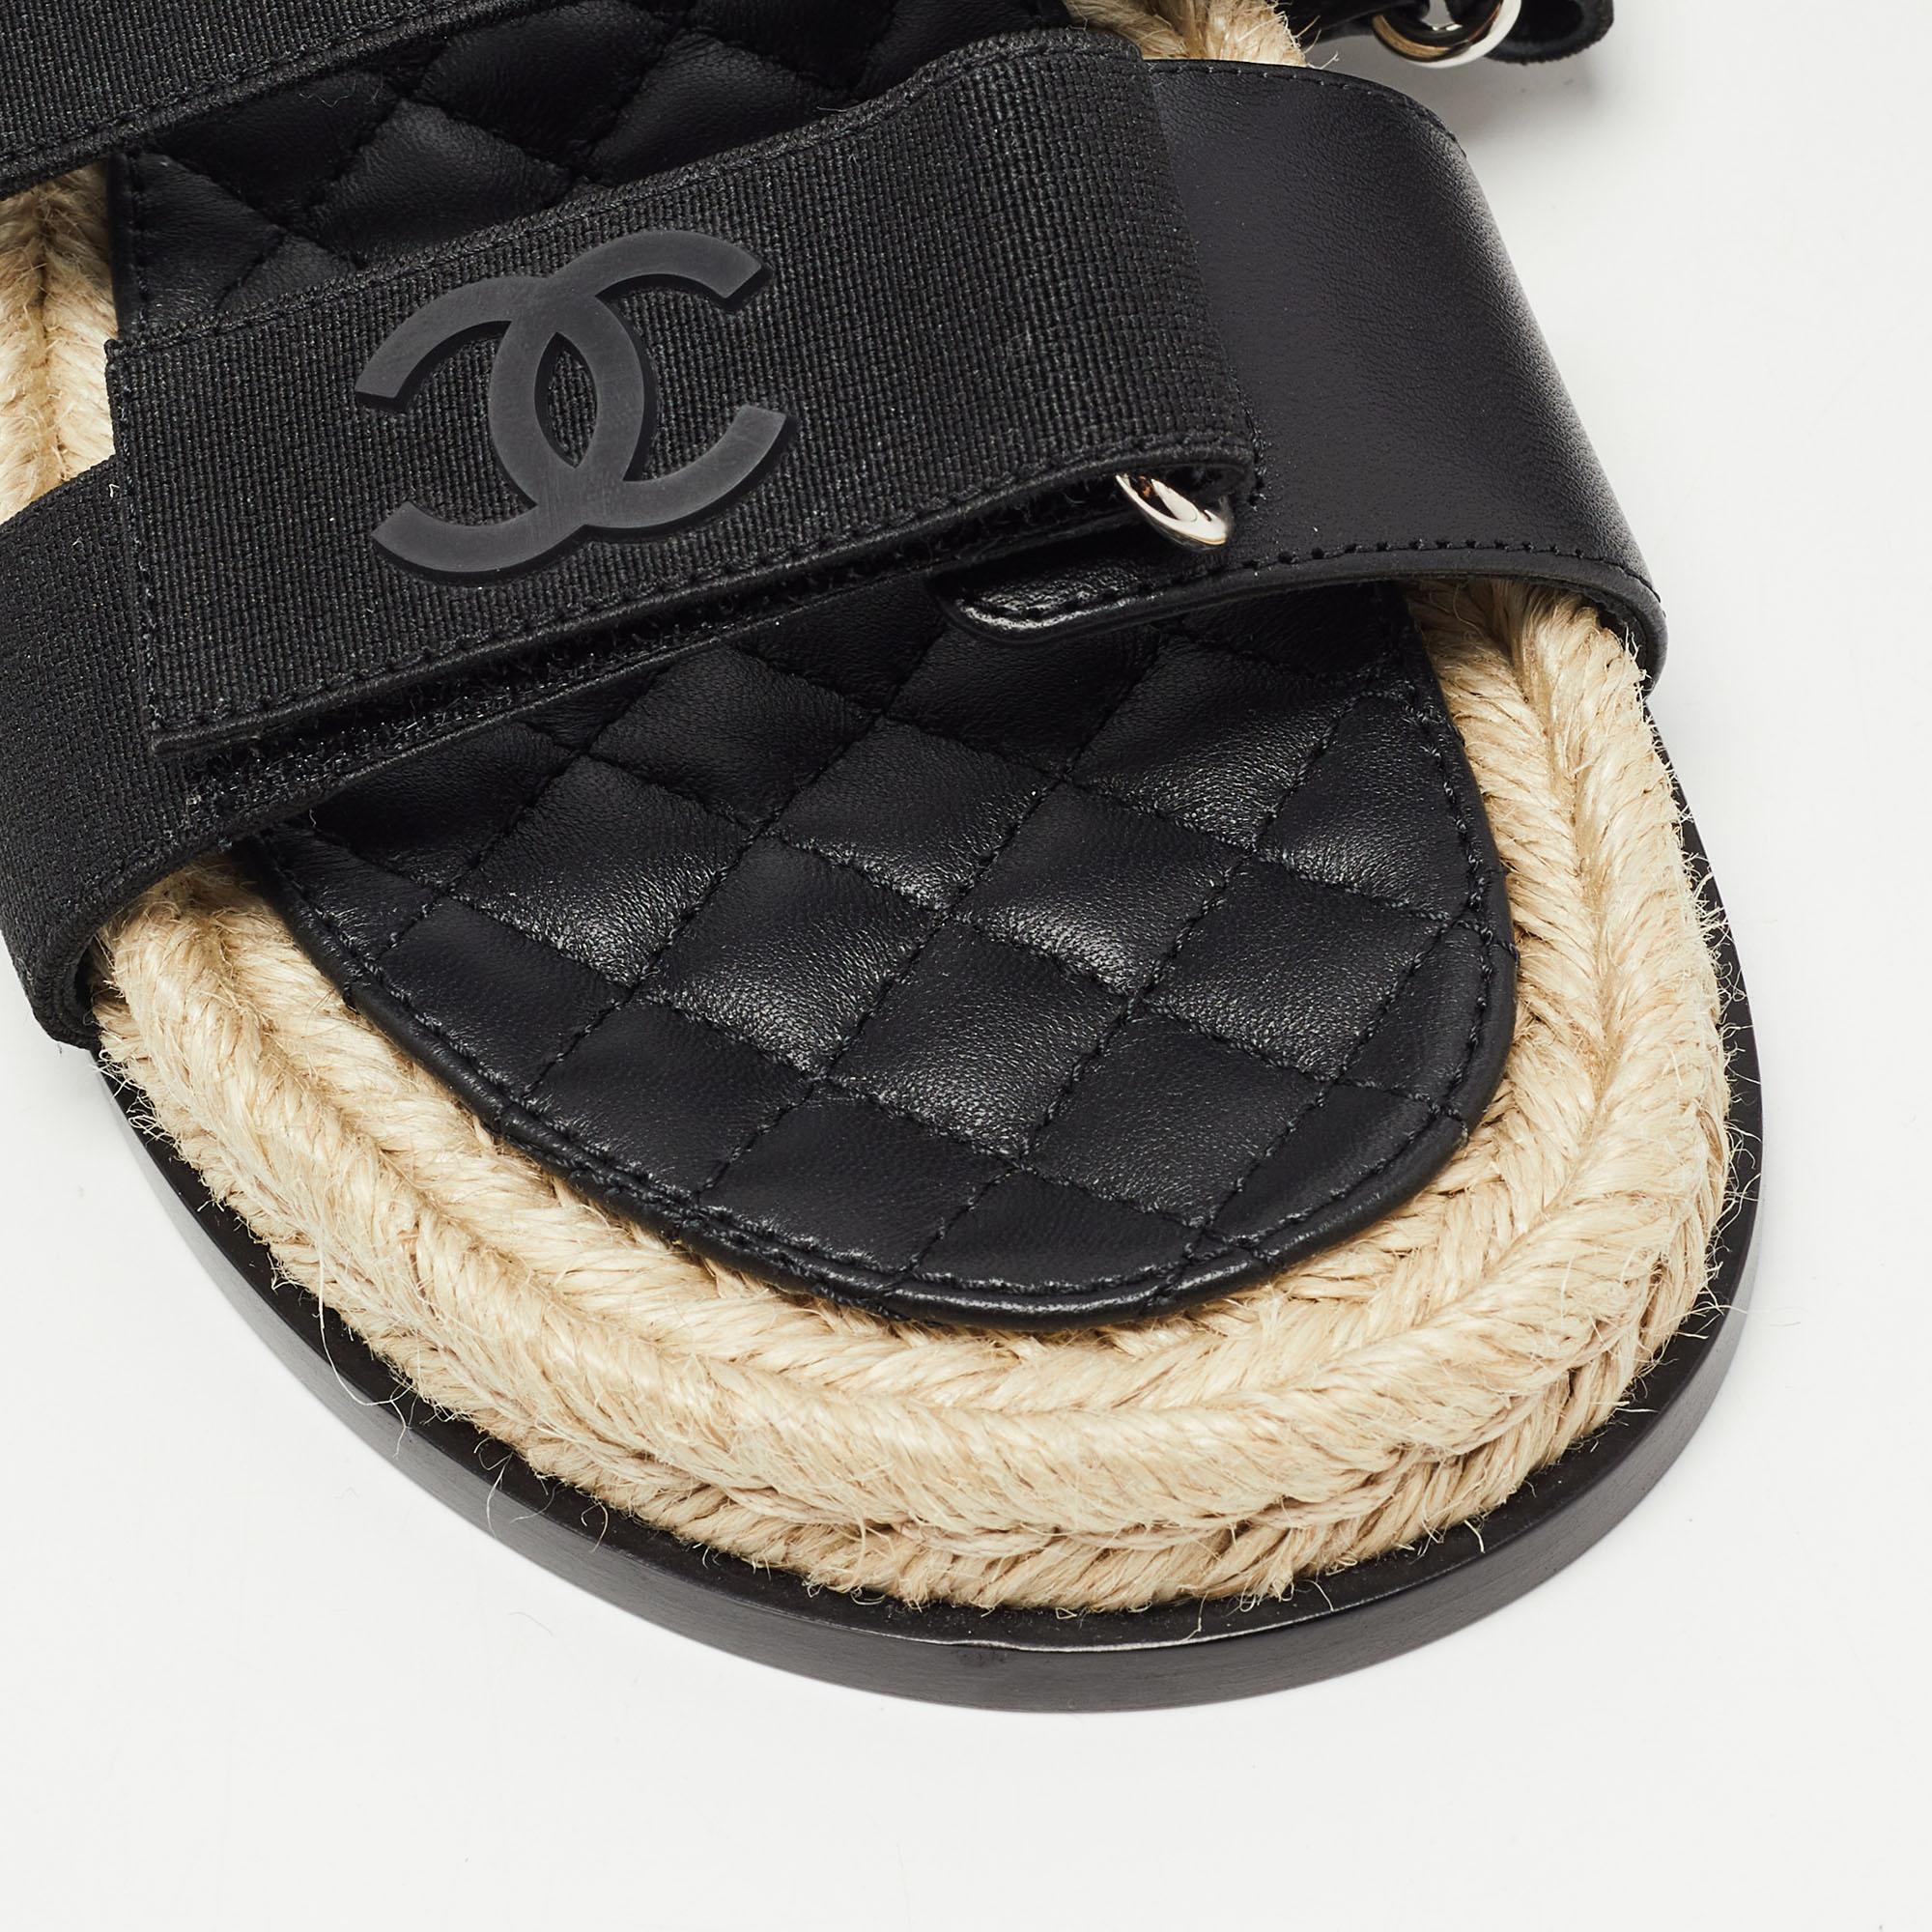 Chanel Black Leather and Canvas Dad Slingback Sandals Size 38 3